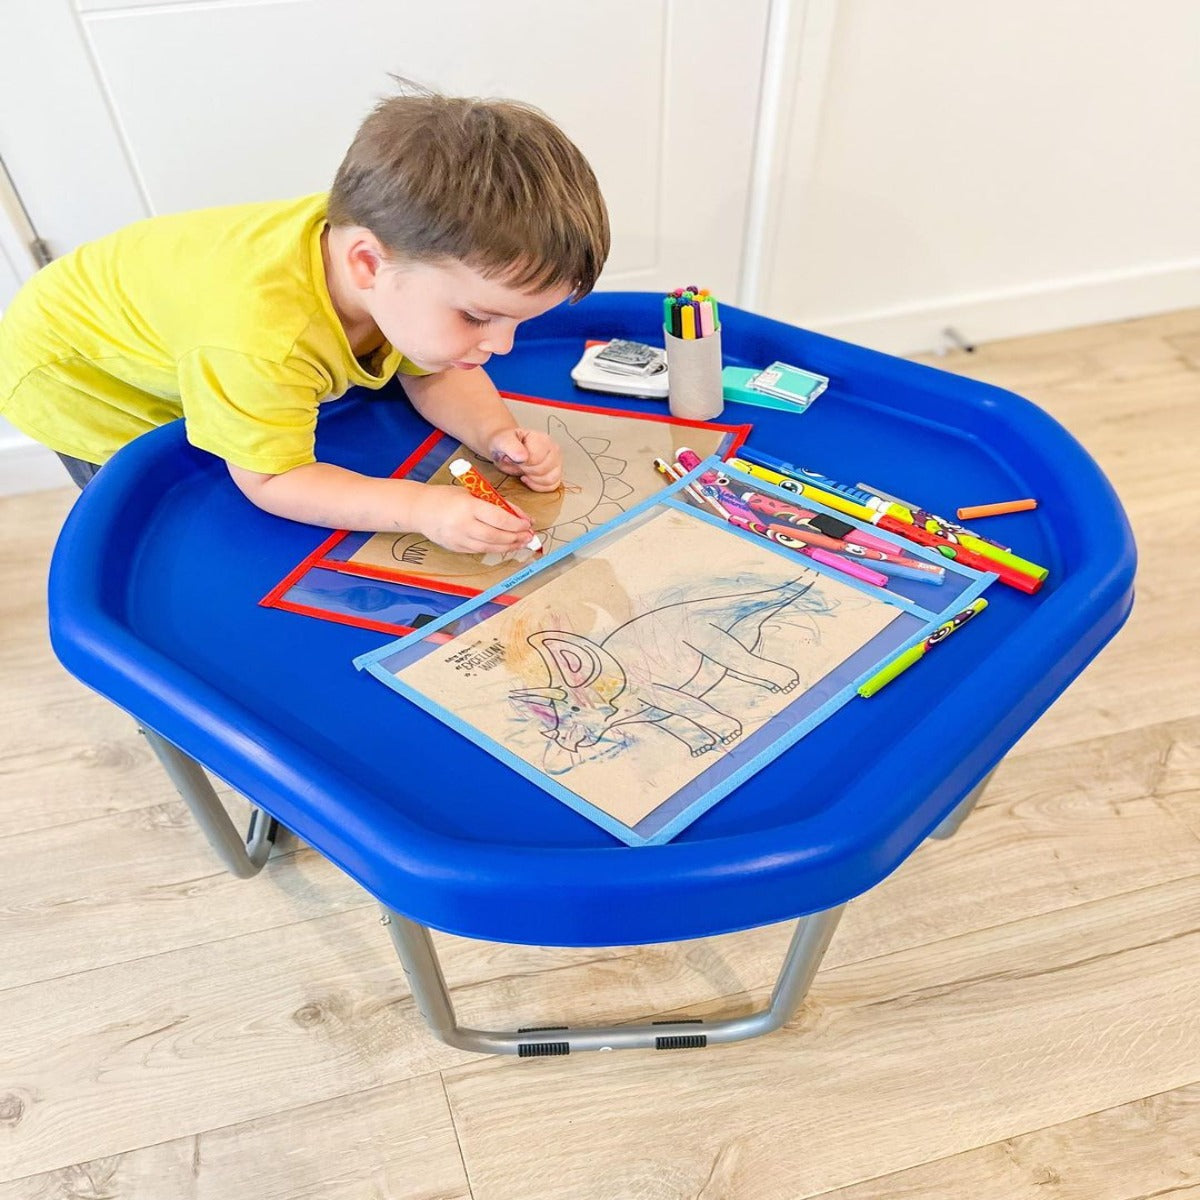 Mini Tuff Tray and Stand, Our new smaller Mini Tuff Tray and Stand is simple to store and can also fit through a standard doorway making it easy to move around quickly. The Mini Tuff Tray and Stand is a staple resource for any early learning environment from sand and water to messy play, children can get creative with endless learning and exploring activities. The mini tuff tray stand is supplied with non-slip plastic feet and the height can be adjusted depending on the activity and the ages of the children